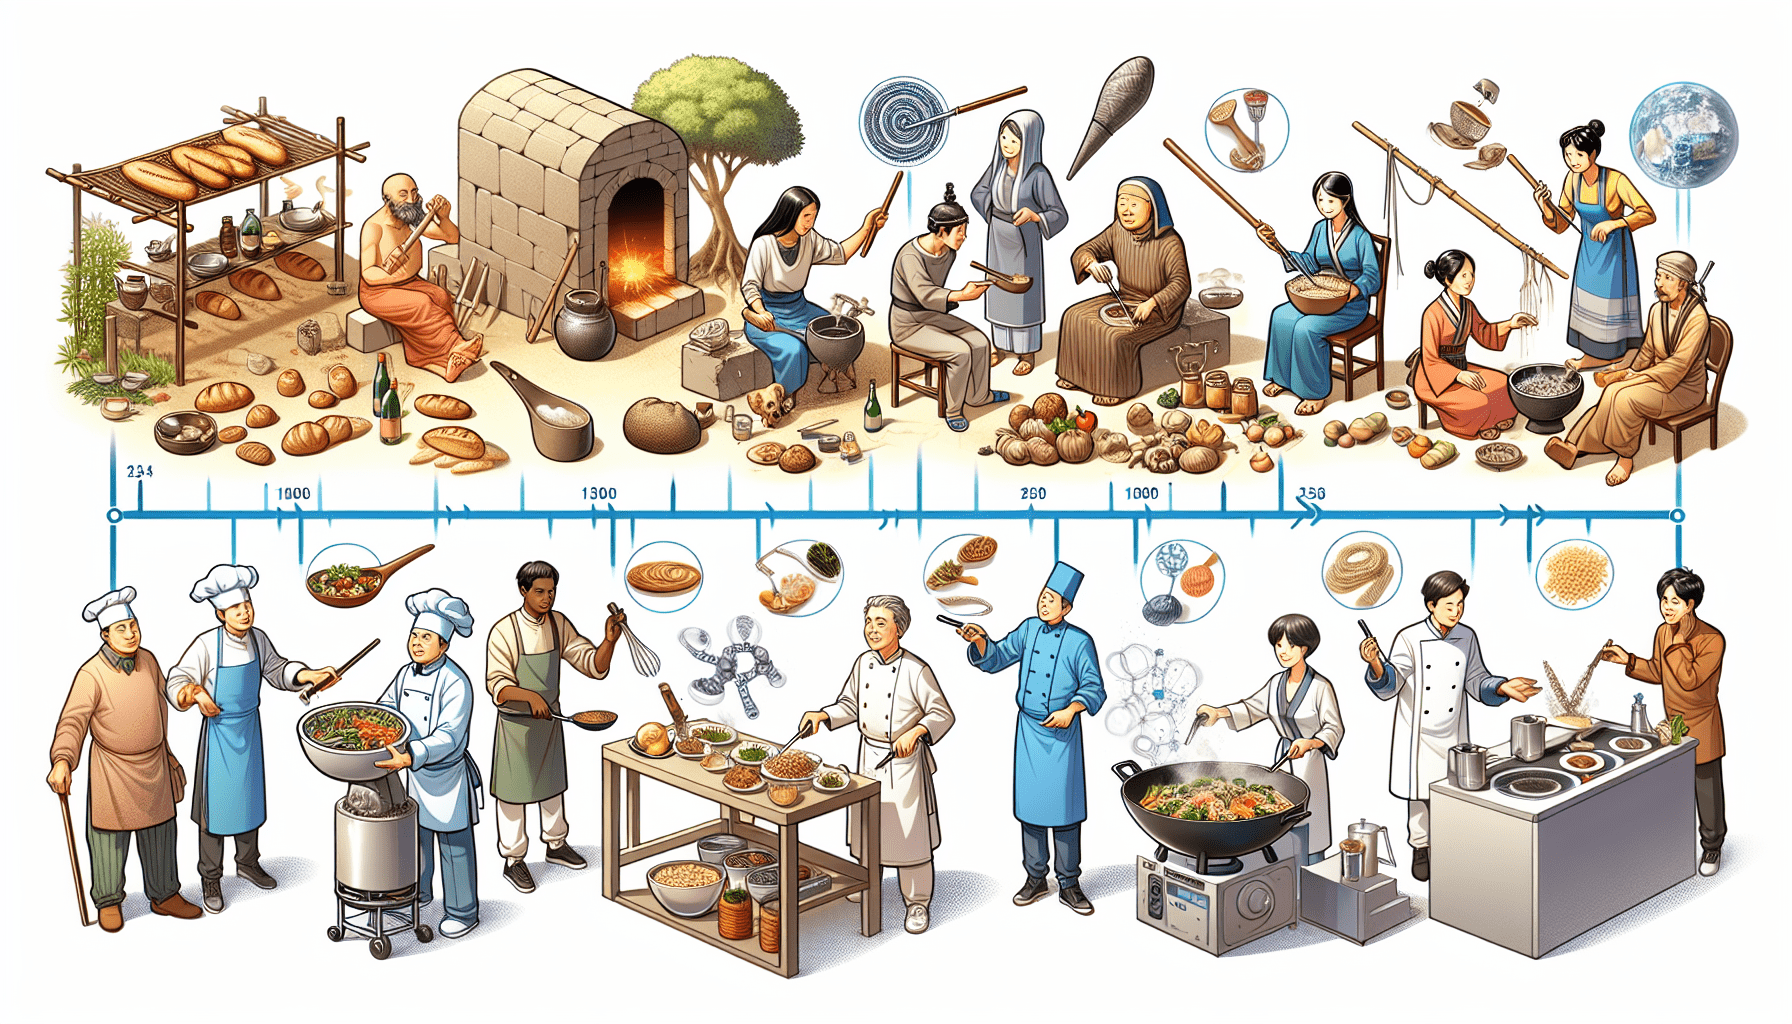 How Has Cooking Evolved From Past To Present?